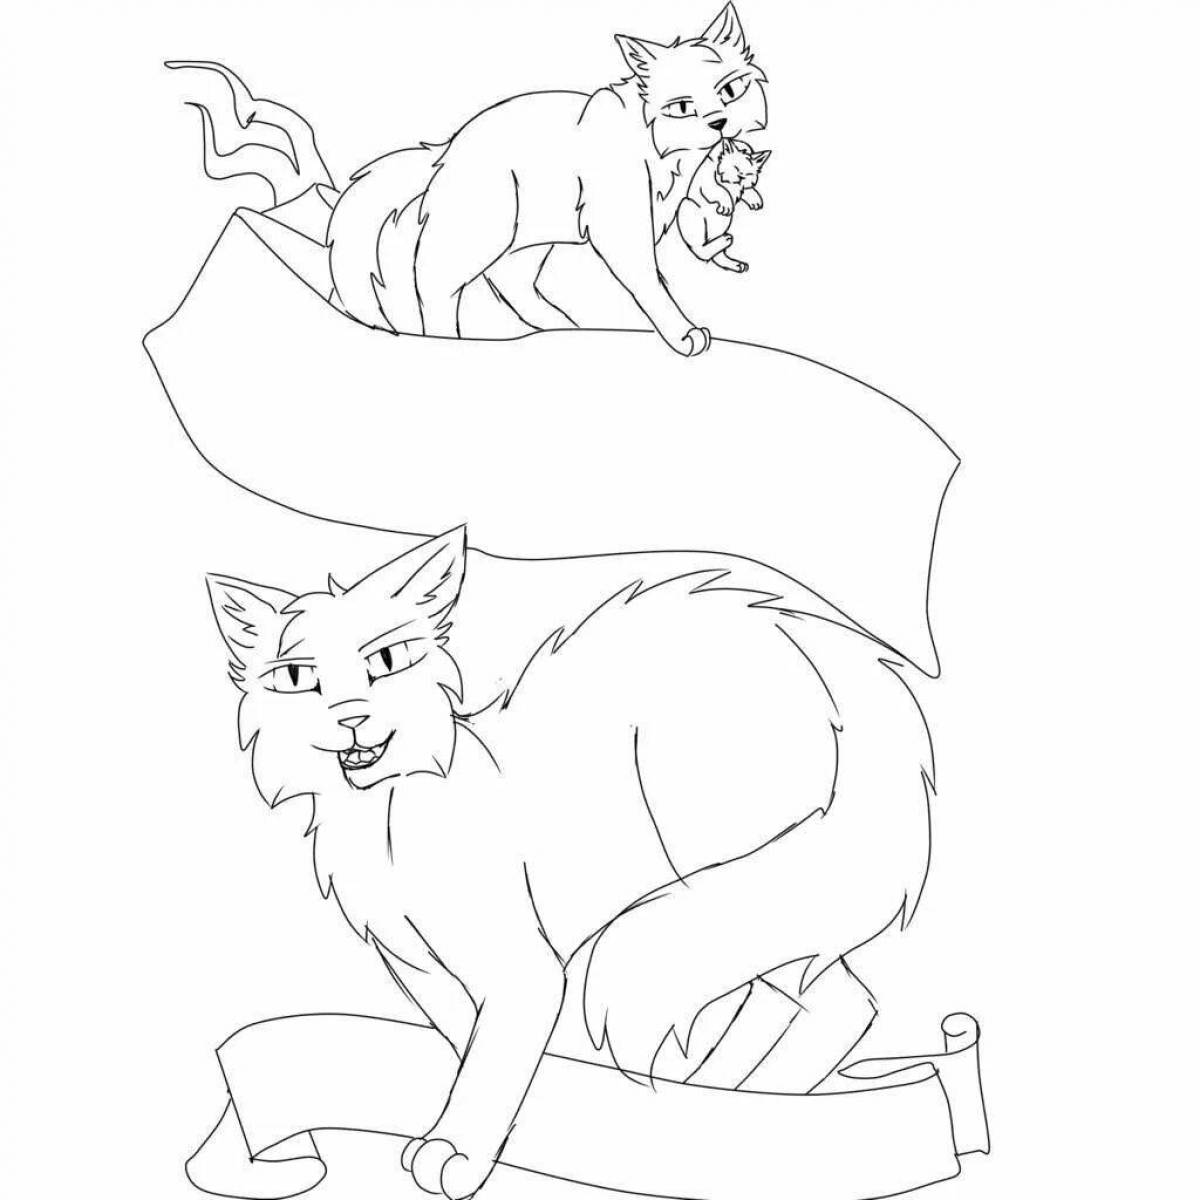 Amazing death warrior cat coloring pages